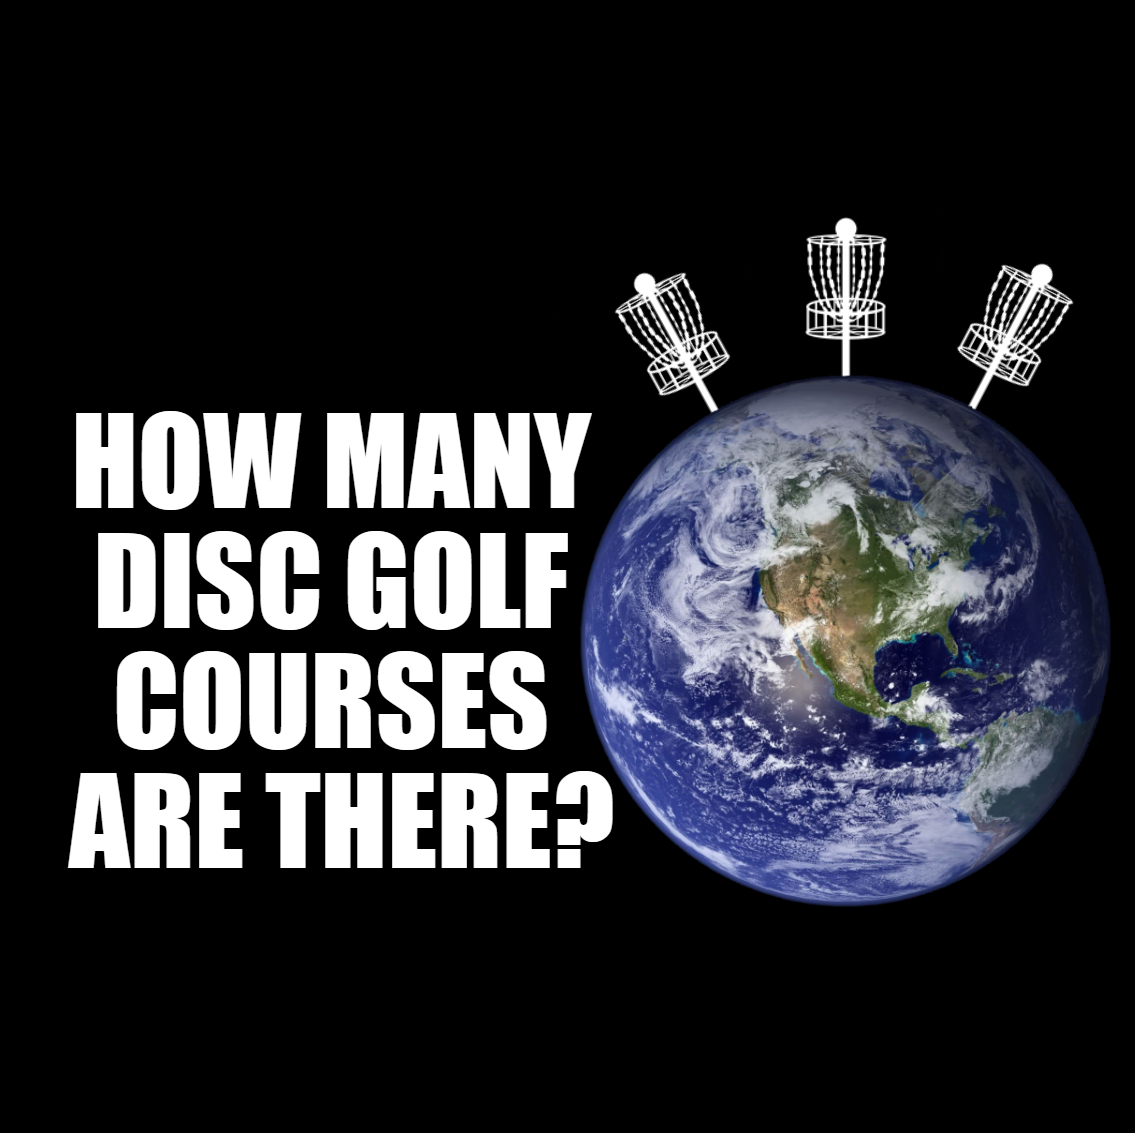 How many disc golf courses are there